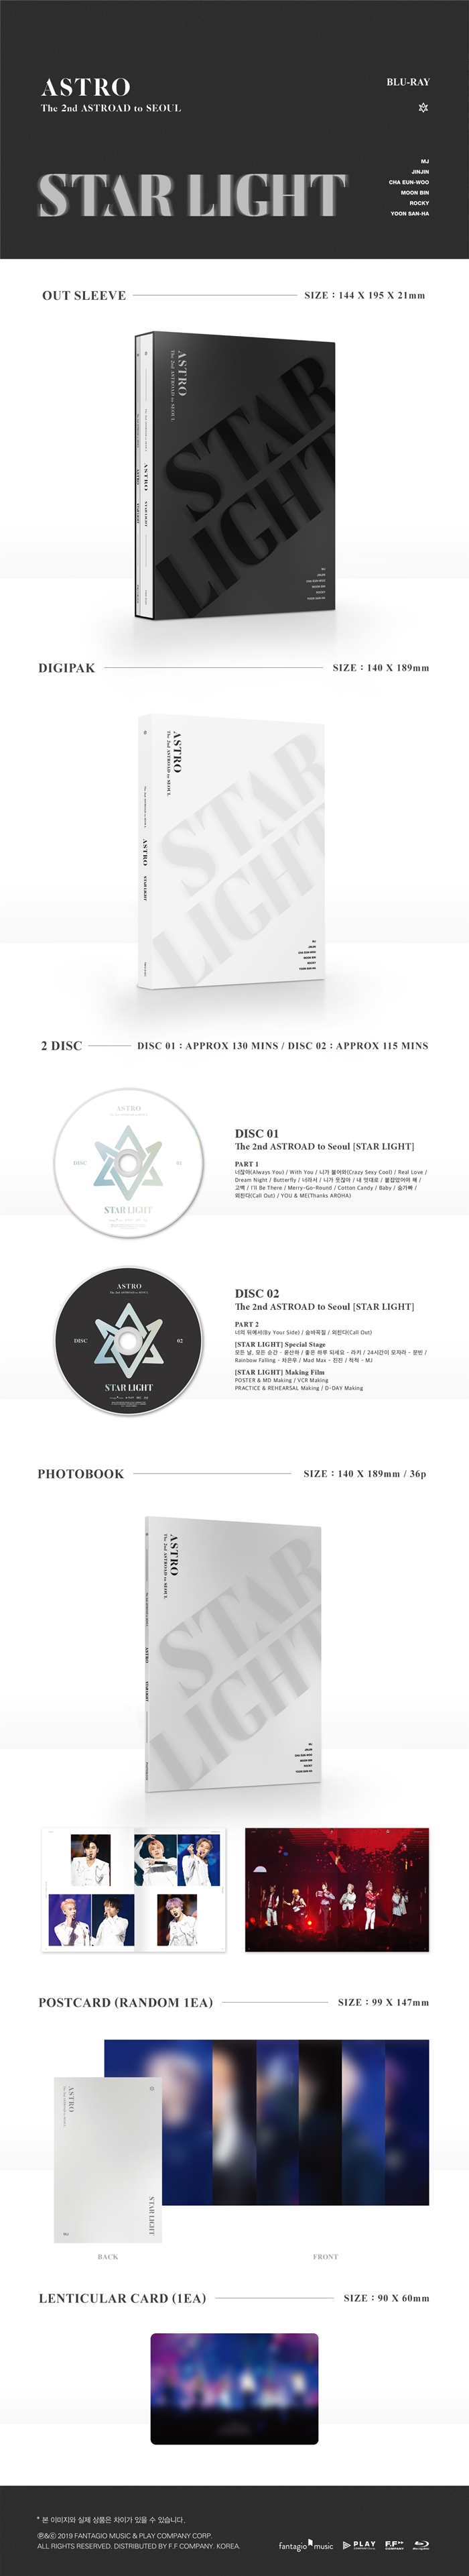 Astro - The 2nd Astroad To Seoul [Star Light] Blu-Ray – Choice